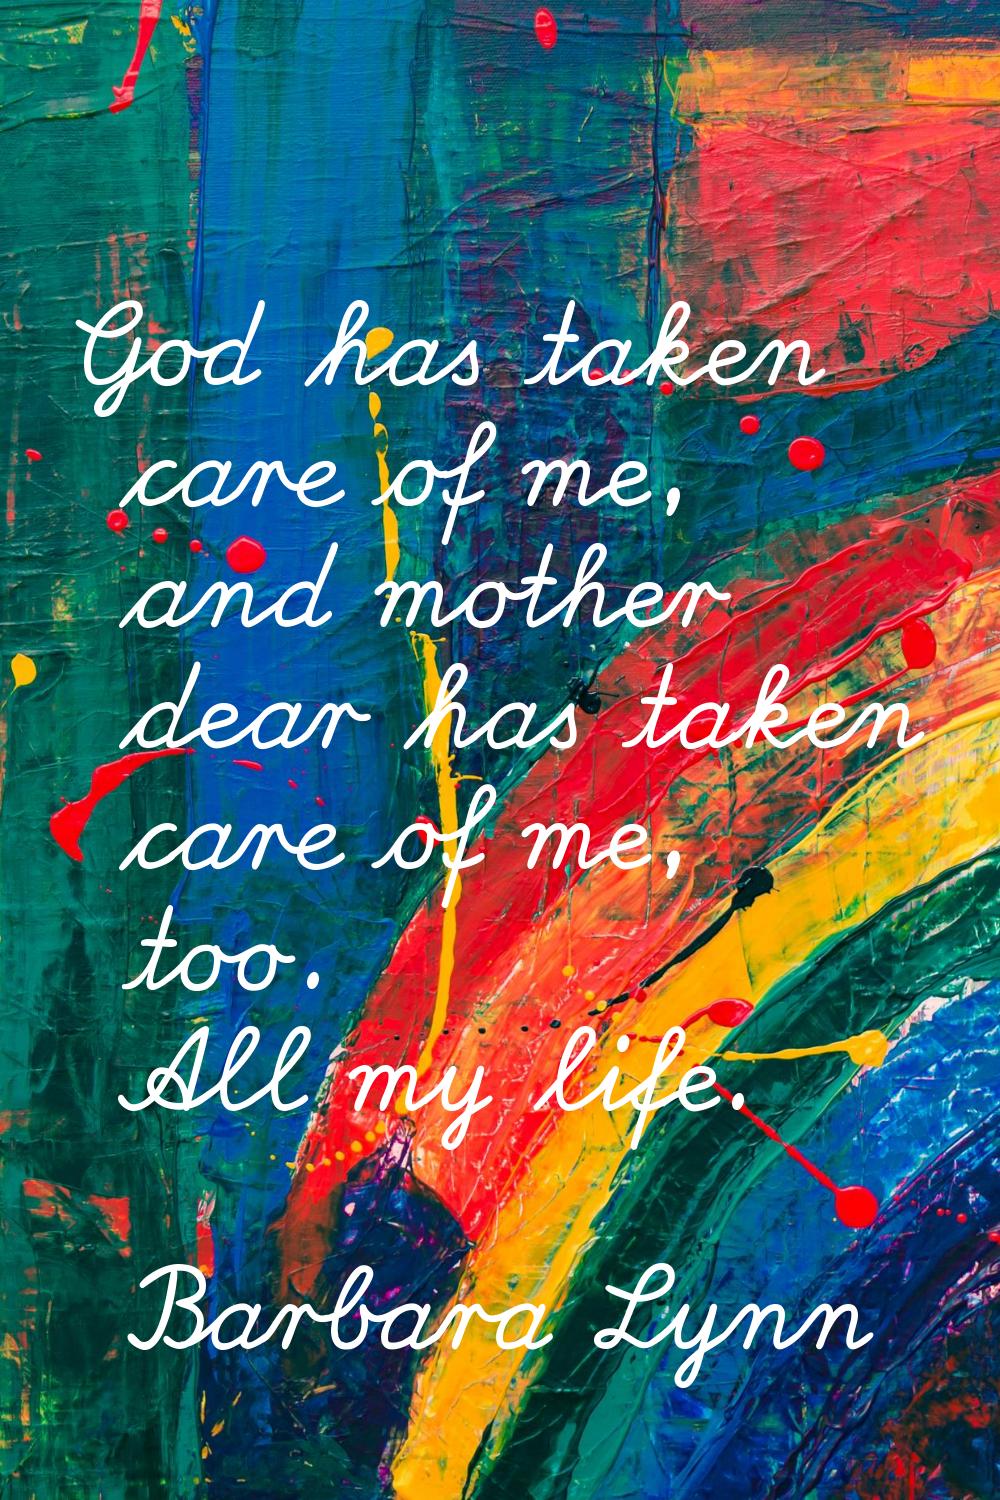 God has taken care of me, and mother dear has taken care of me, too. All my life.